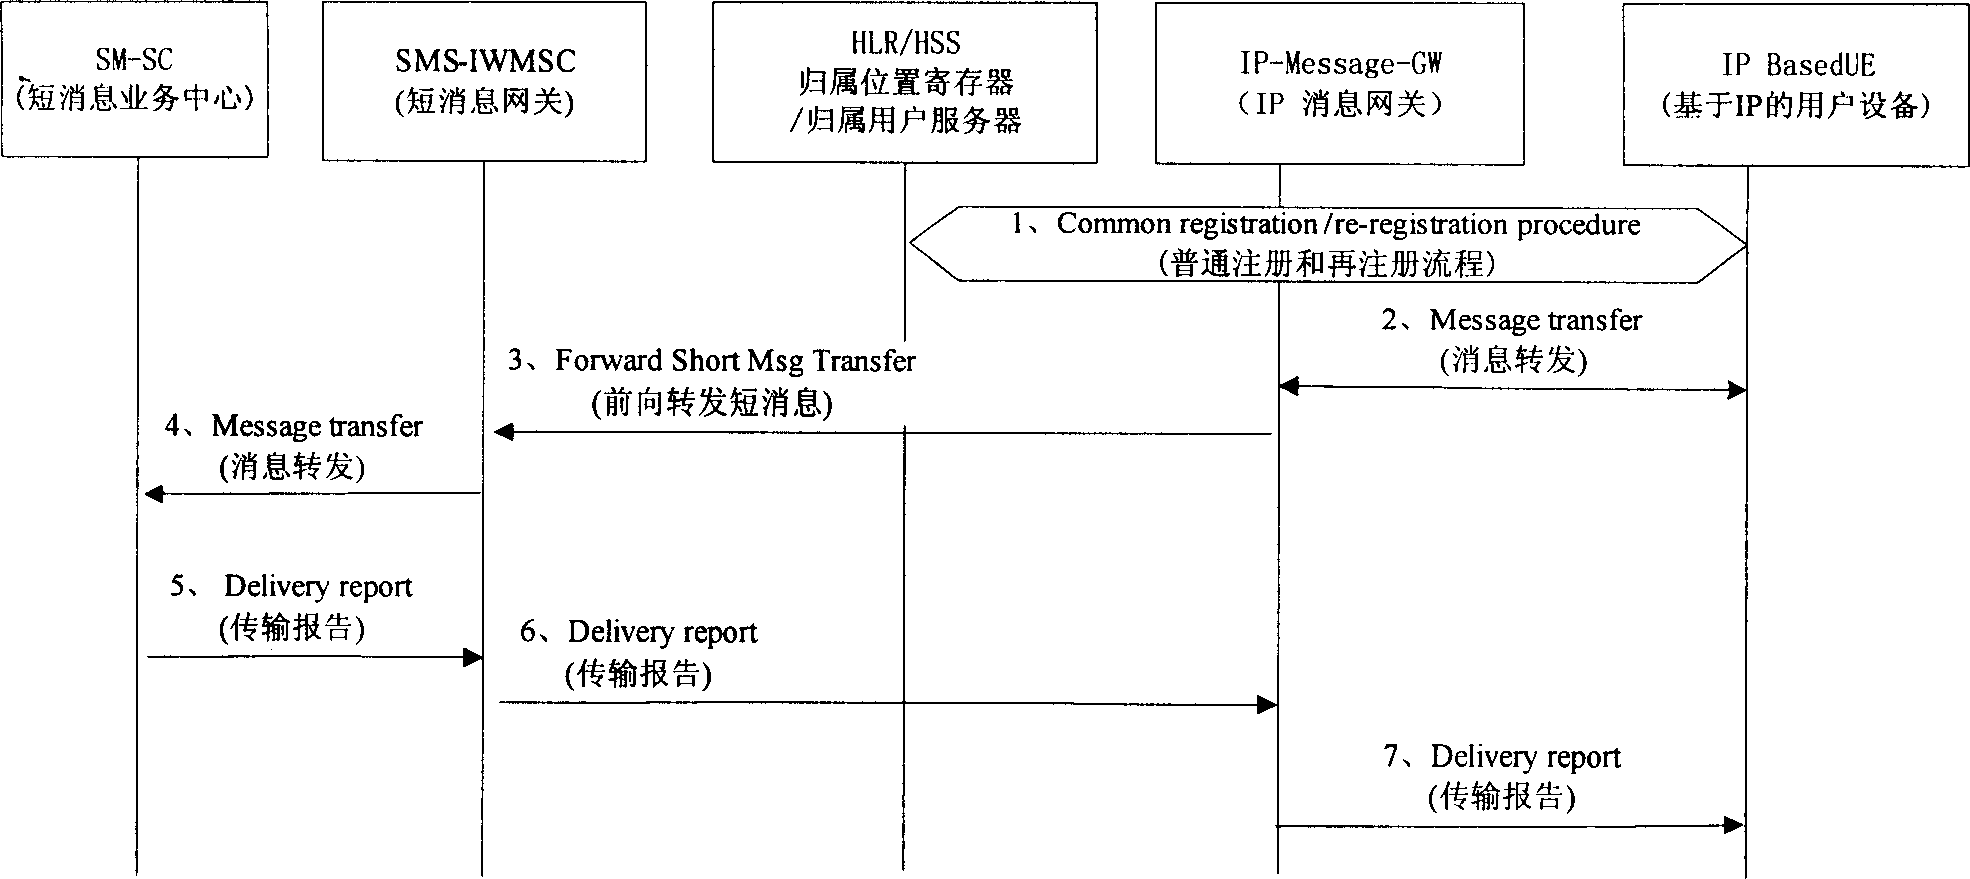 Method for IP user realizing mobile data service based on IP access